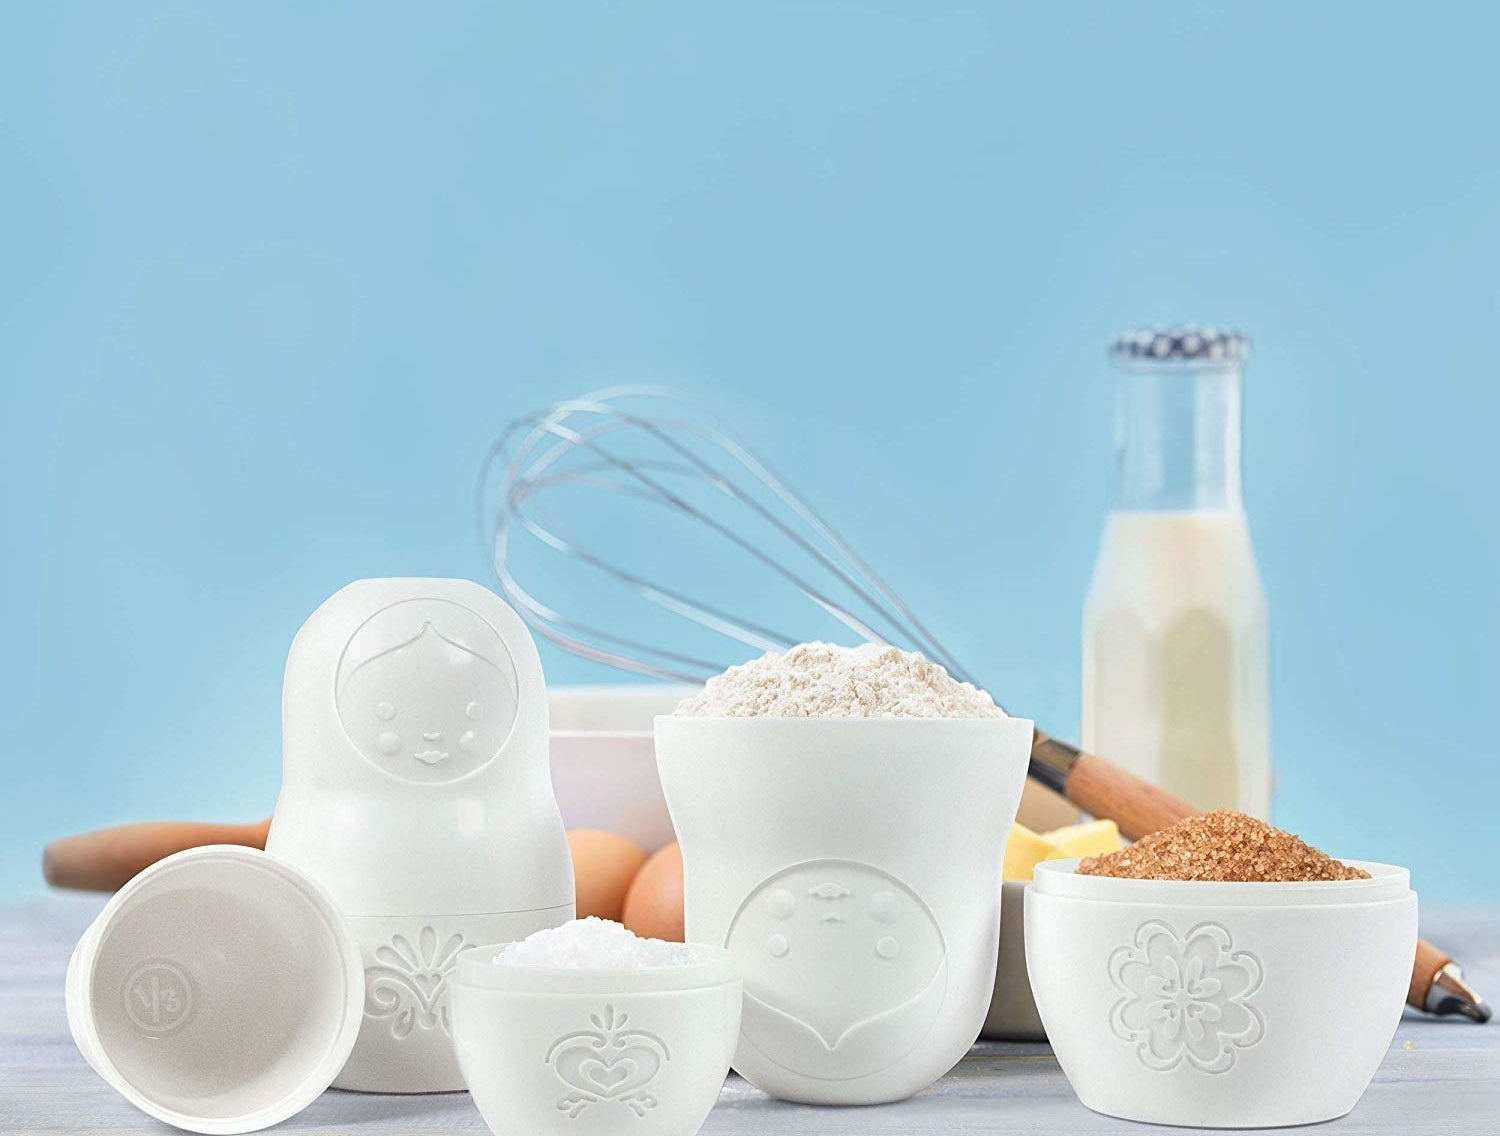 A set of nesting doll measuring cups filled with dry ingredients